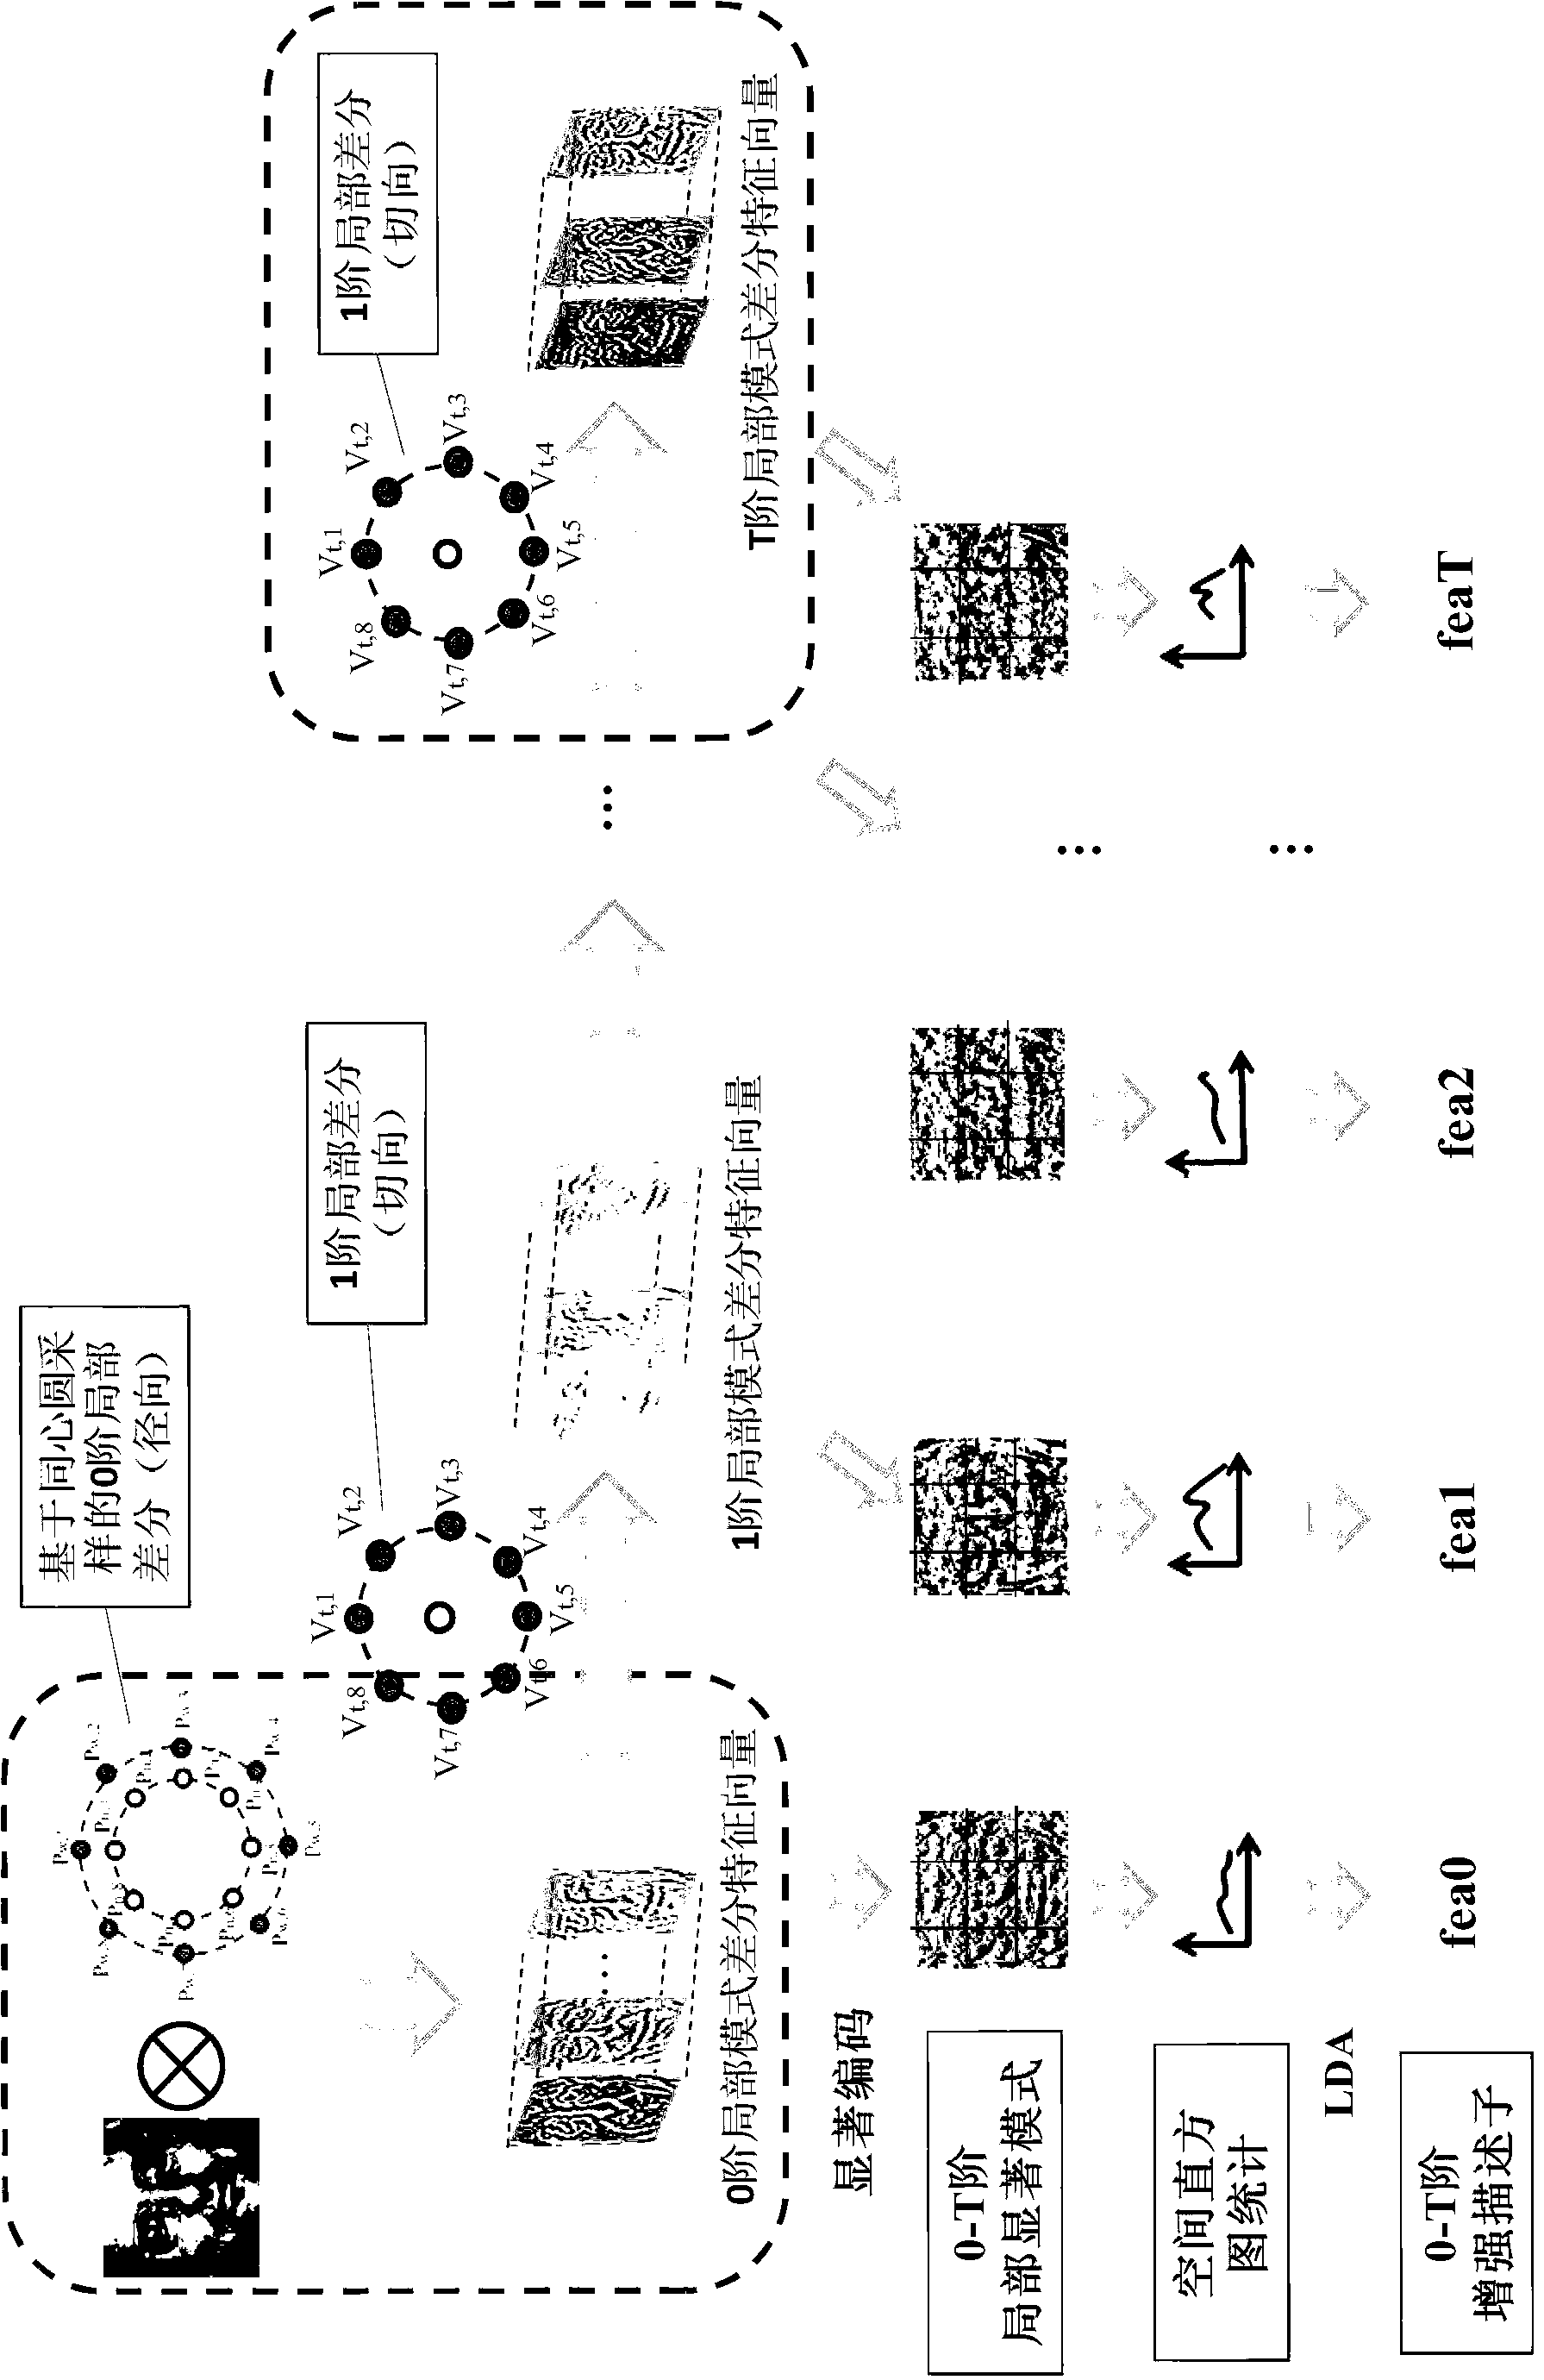 Human face recognizing method based on multi-level local obvious mode characteristic counting